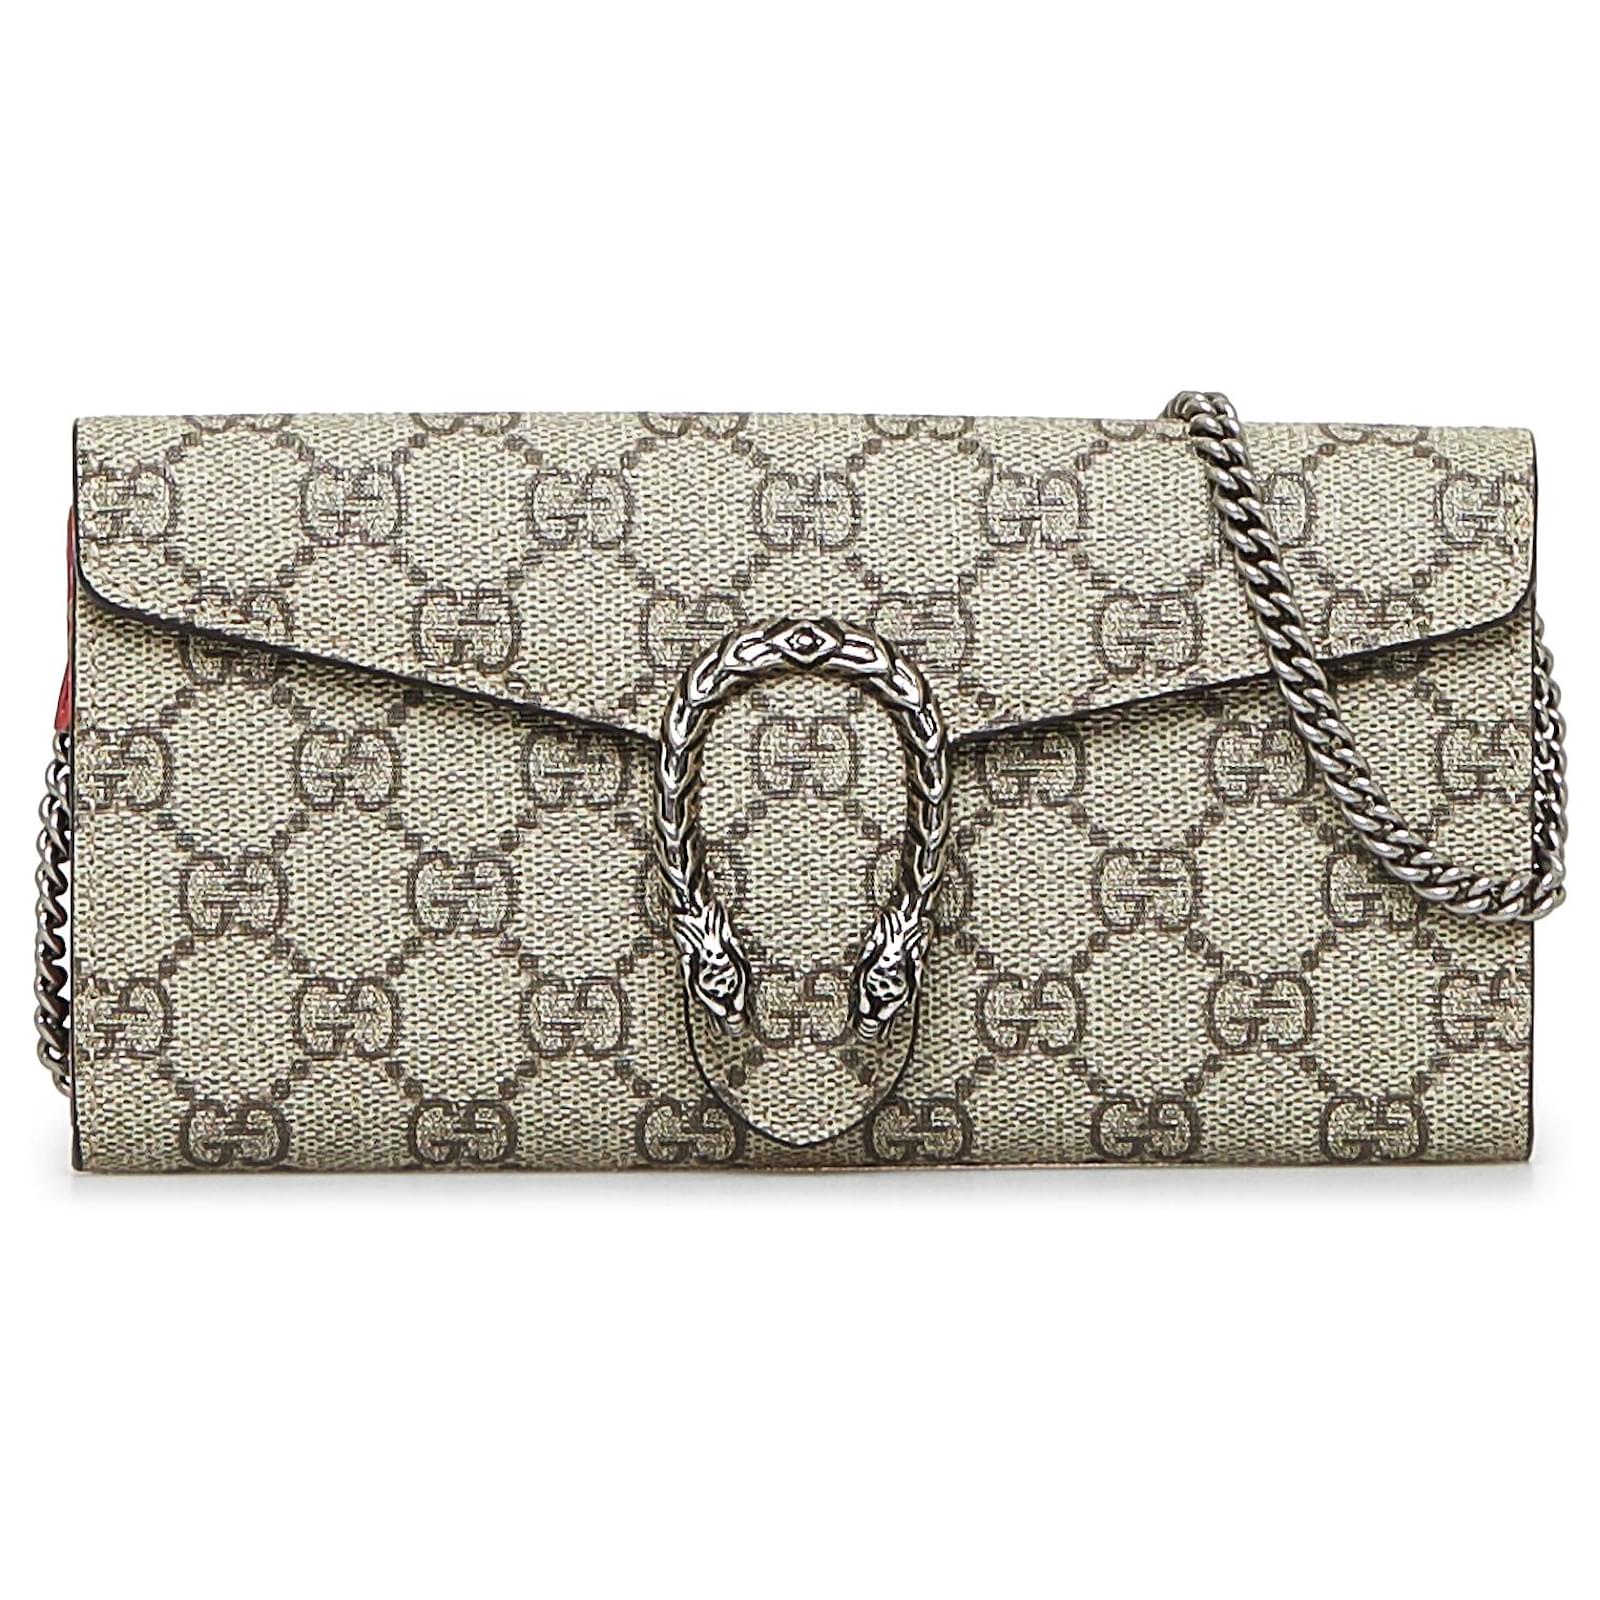 Dionysus GG mini chain wallet in beige and blue Supreme